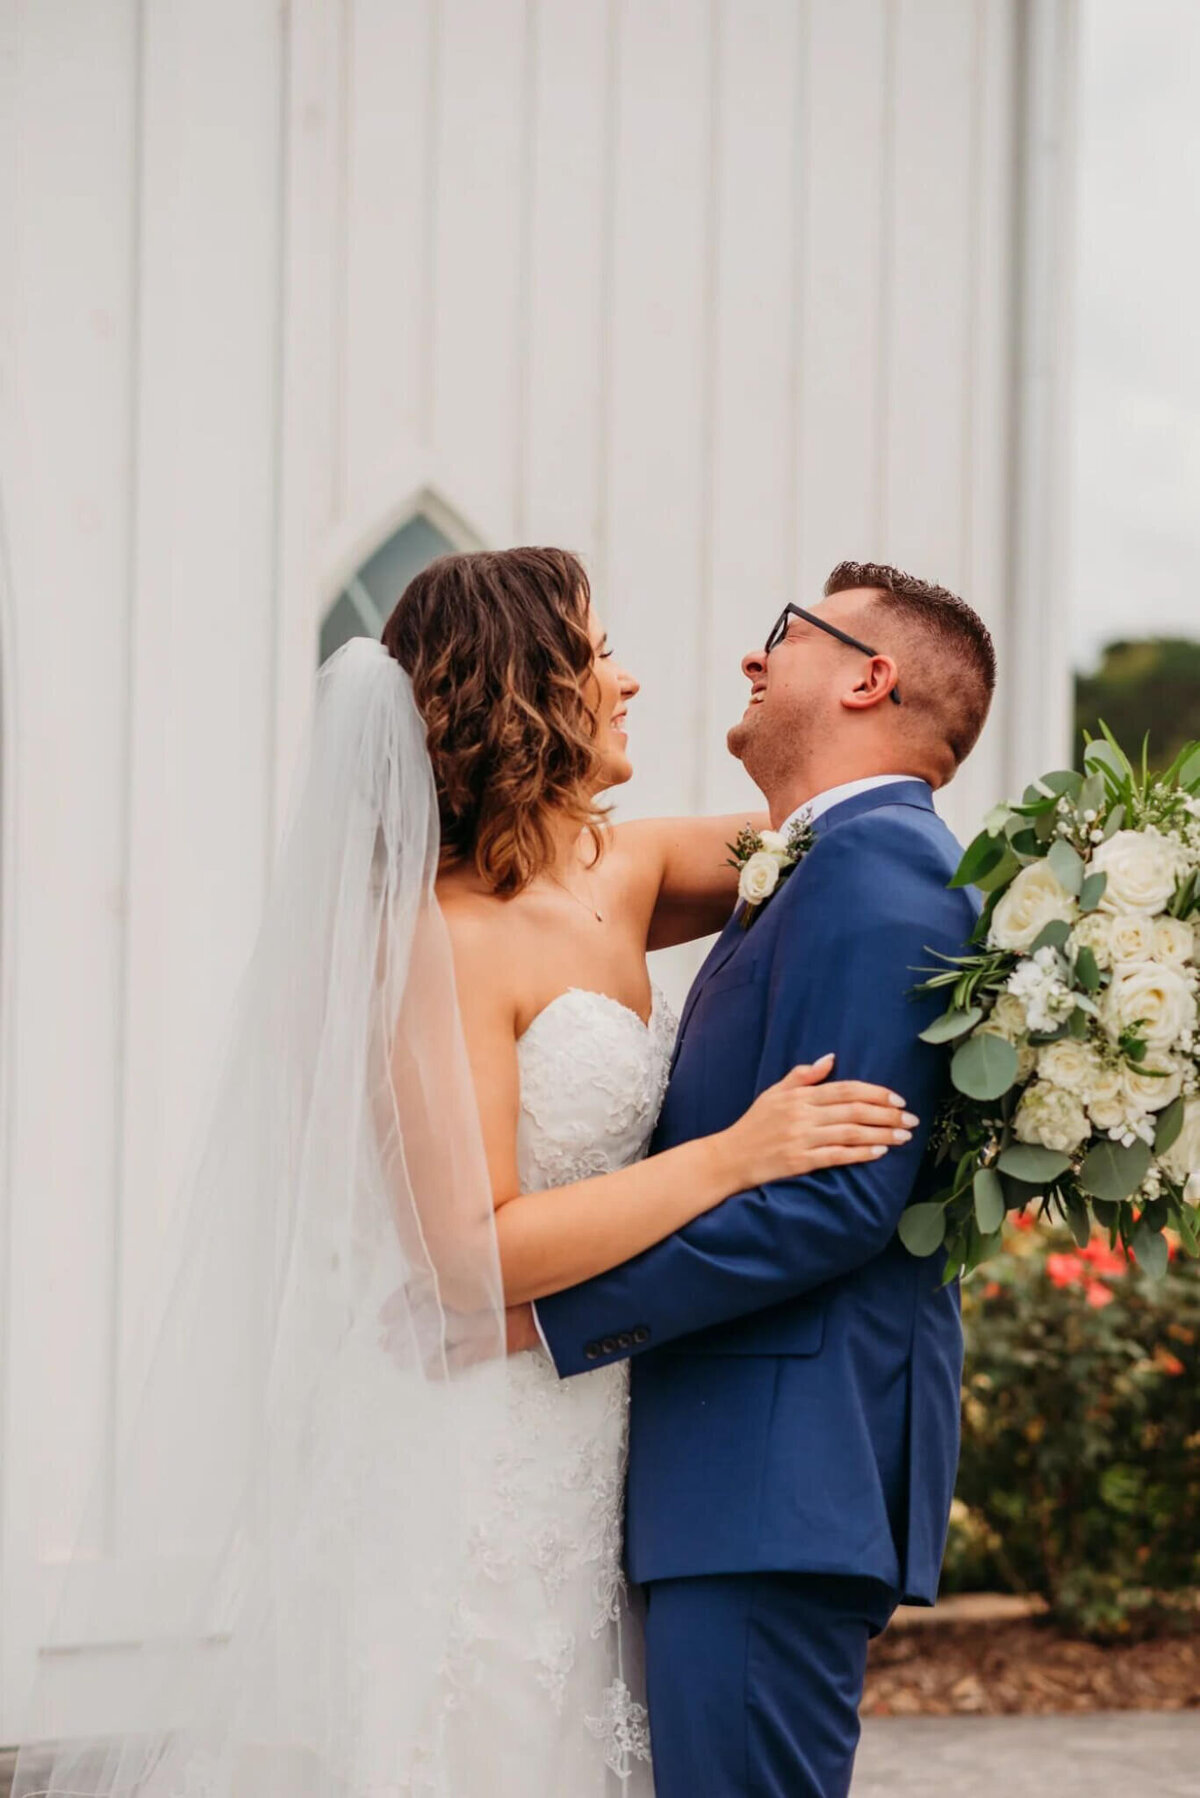 photo of a bride and groom hugging and laughing while standing in front of a white building